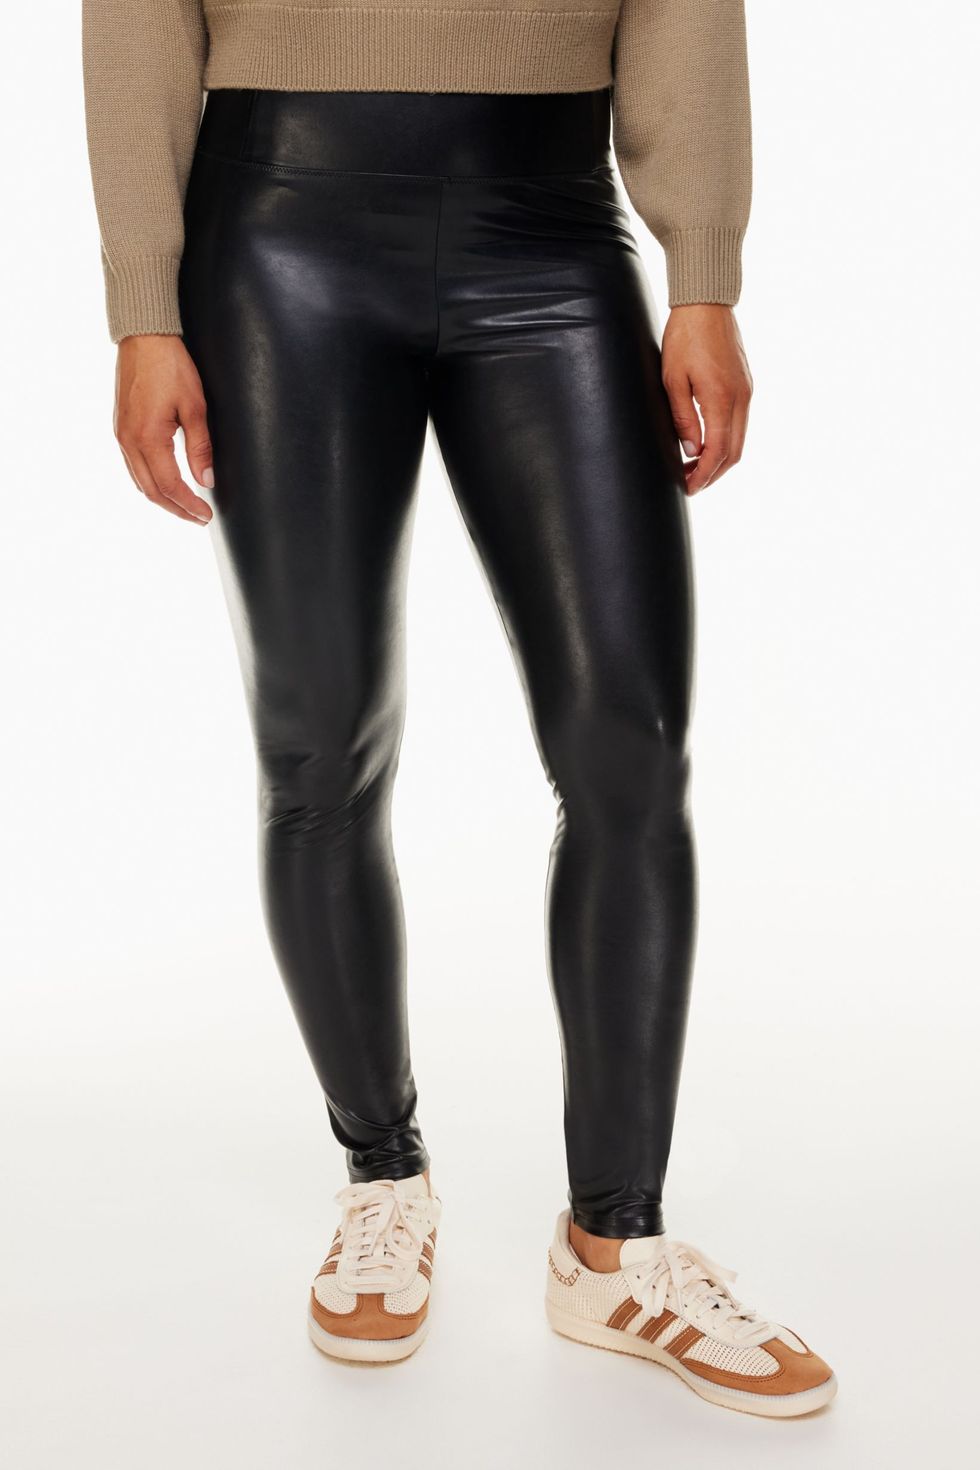 New Ladies Womens Shiny Leather Look Black Leggings Size 6- 8 Wet Look  Trouser